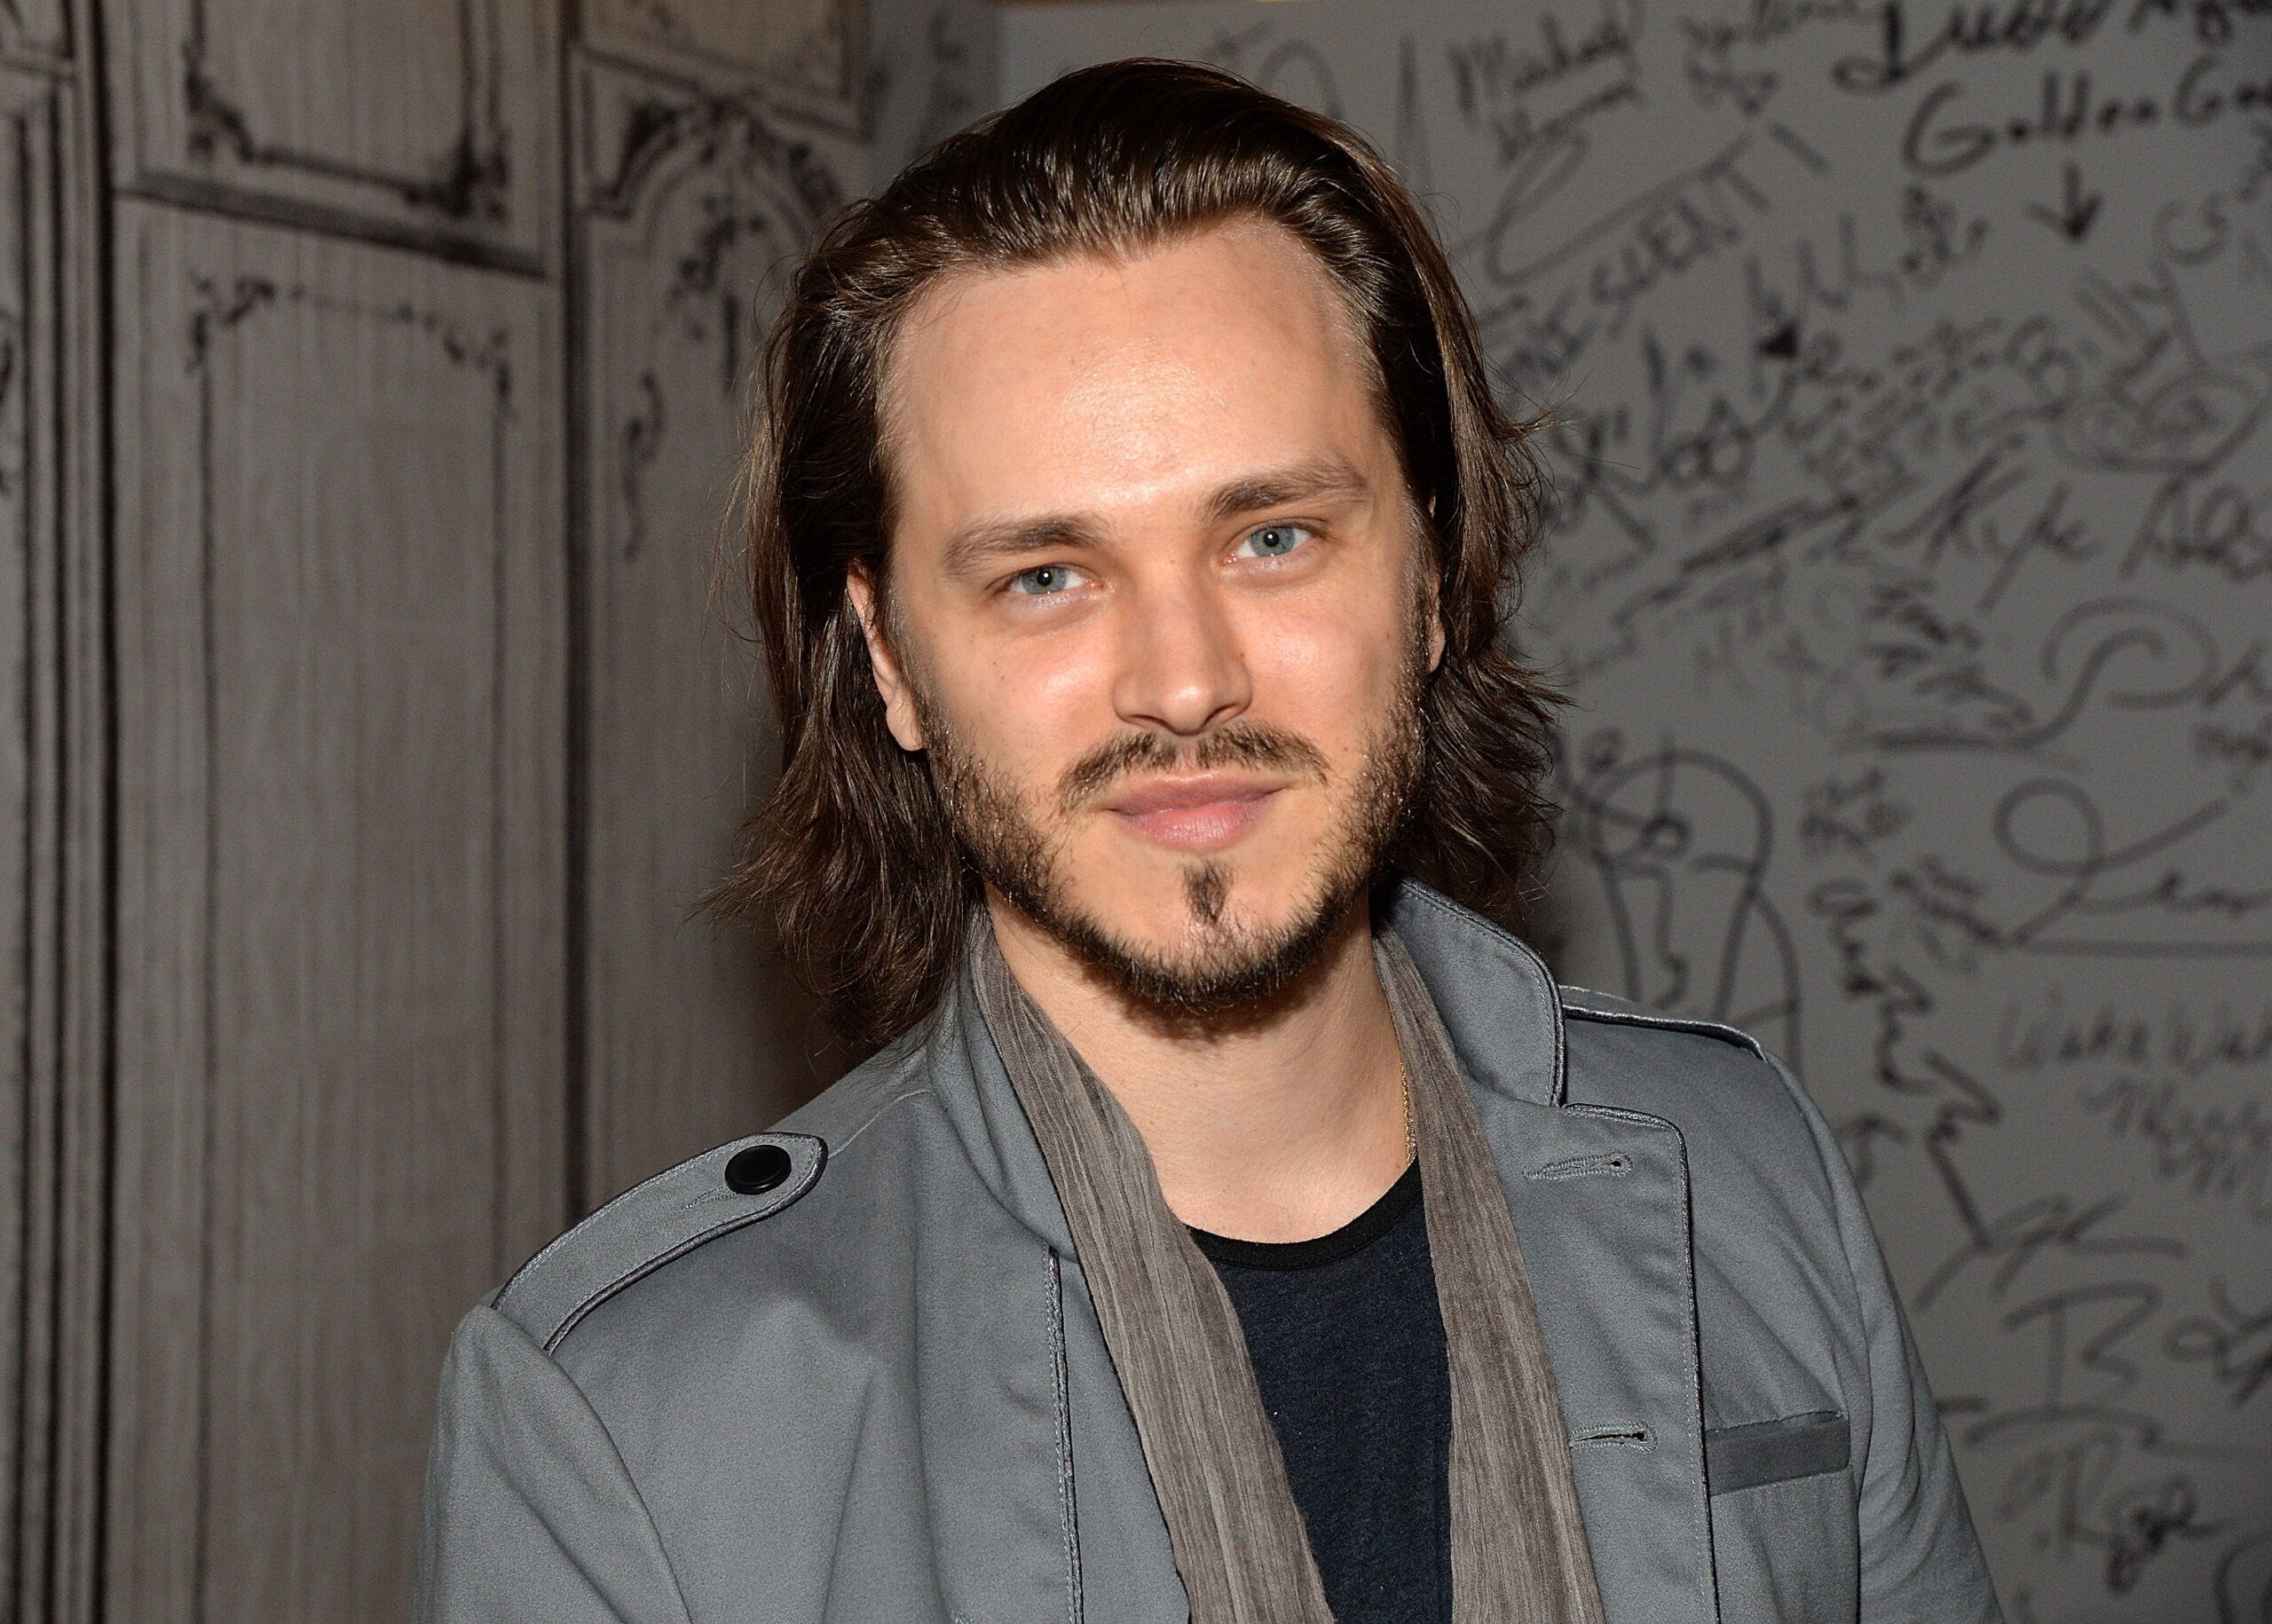 NEW YORK, NY - MAY 05: Actor/musician Jonathan Jackson visits AOL Build to discuss his role on ABC's "Nashville" and his upcoming EP with his band, Enation at AOL Studios In New York on May 5, 2016 in New York City.